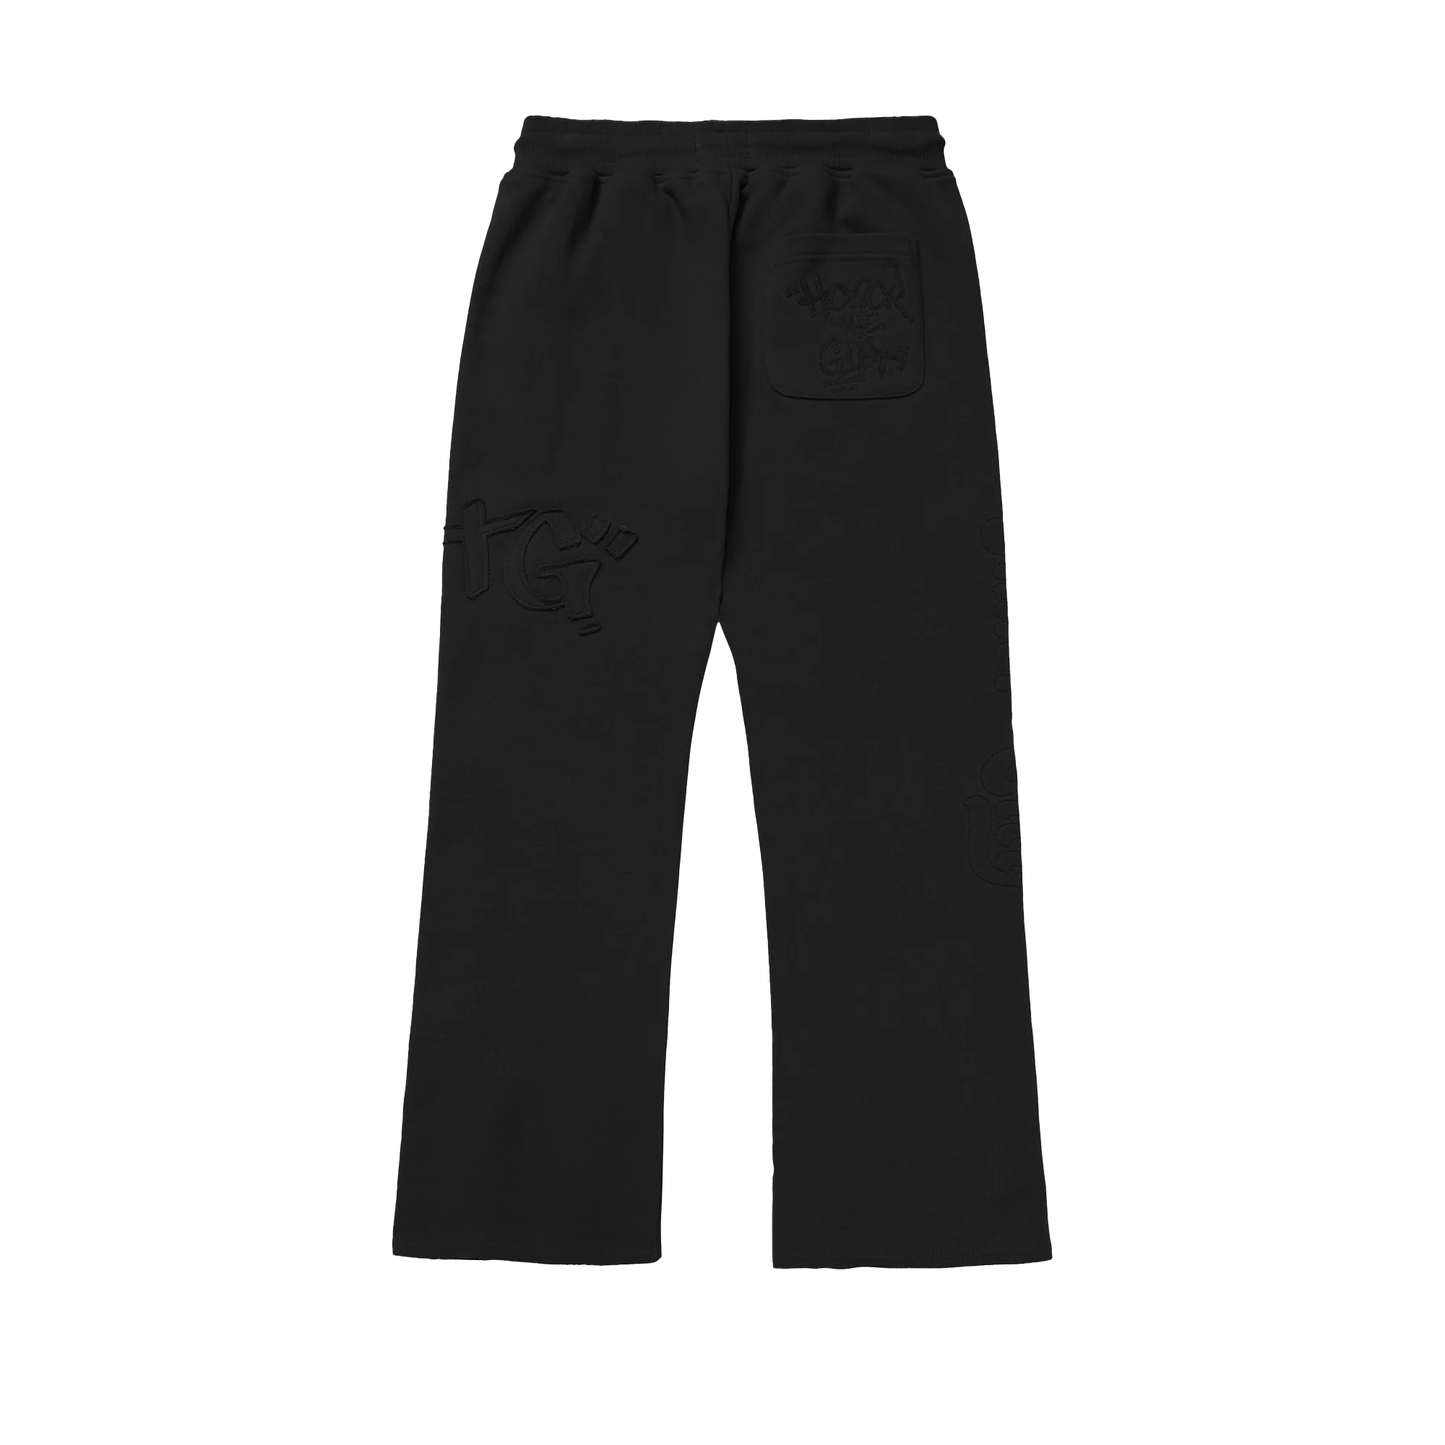 Honor The Gift C-Fall Embroidered Sweatpants - Black